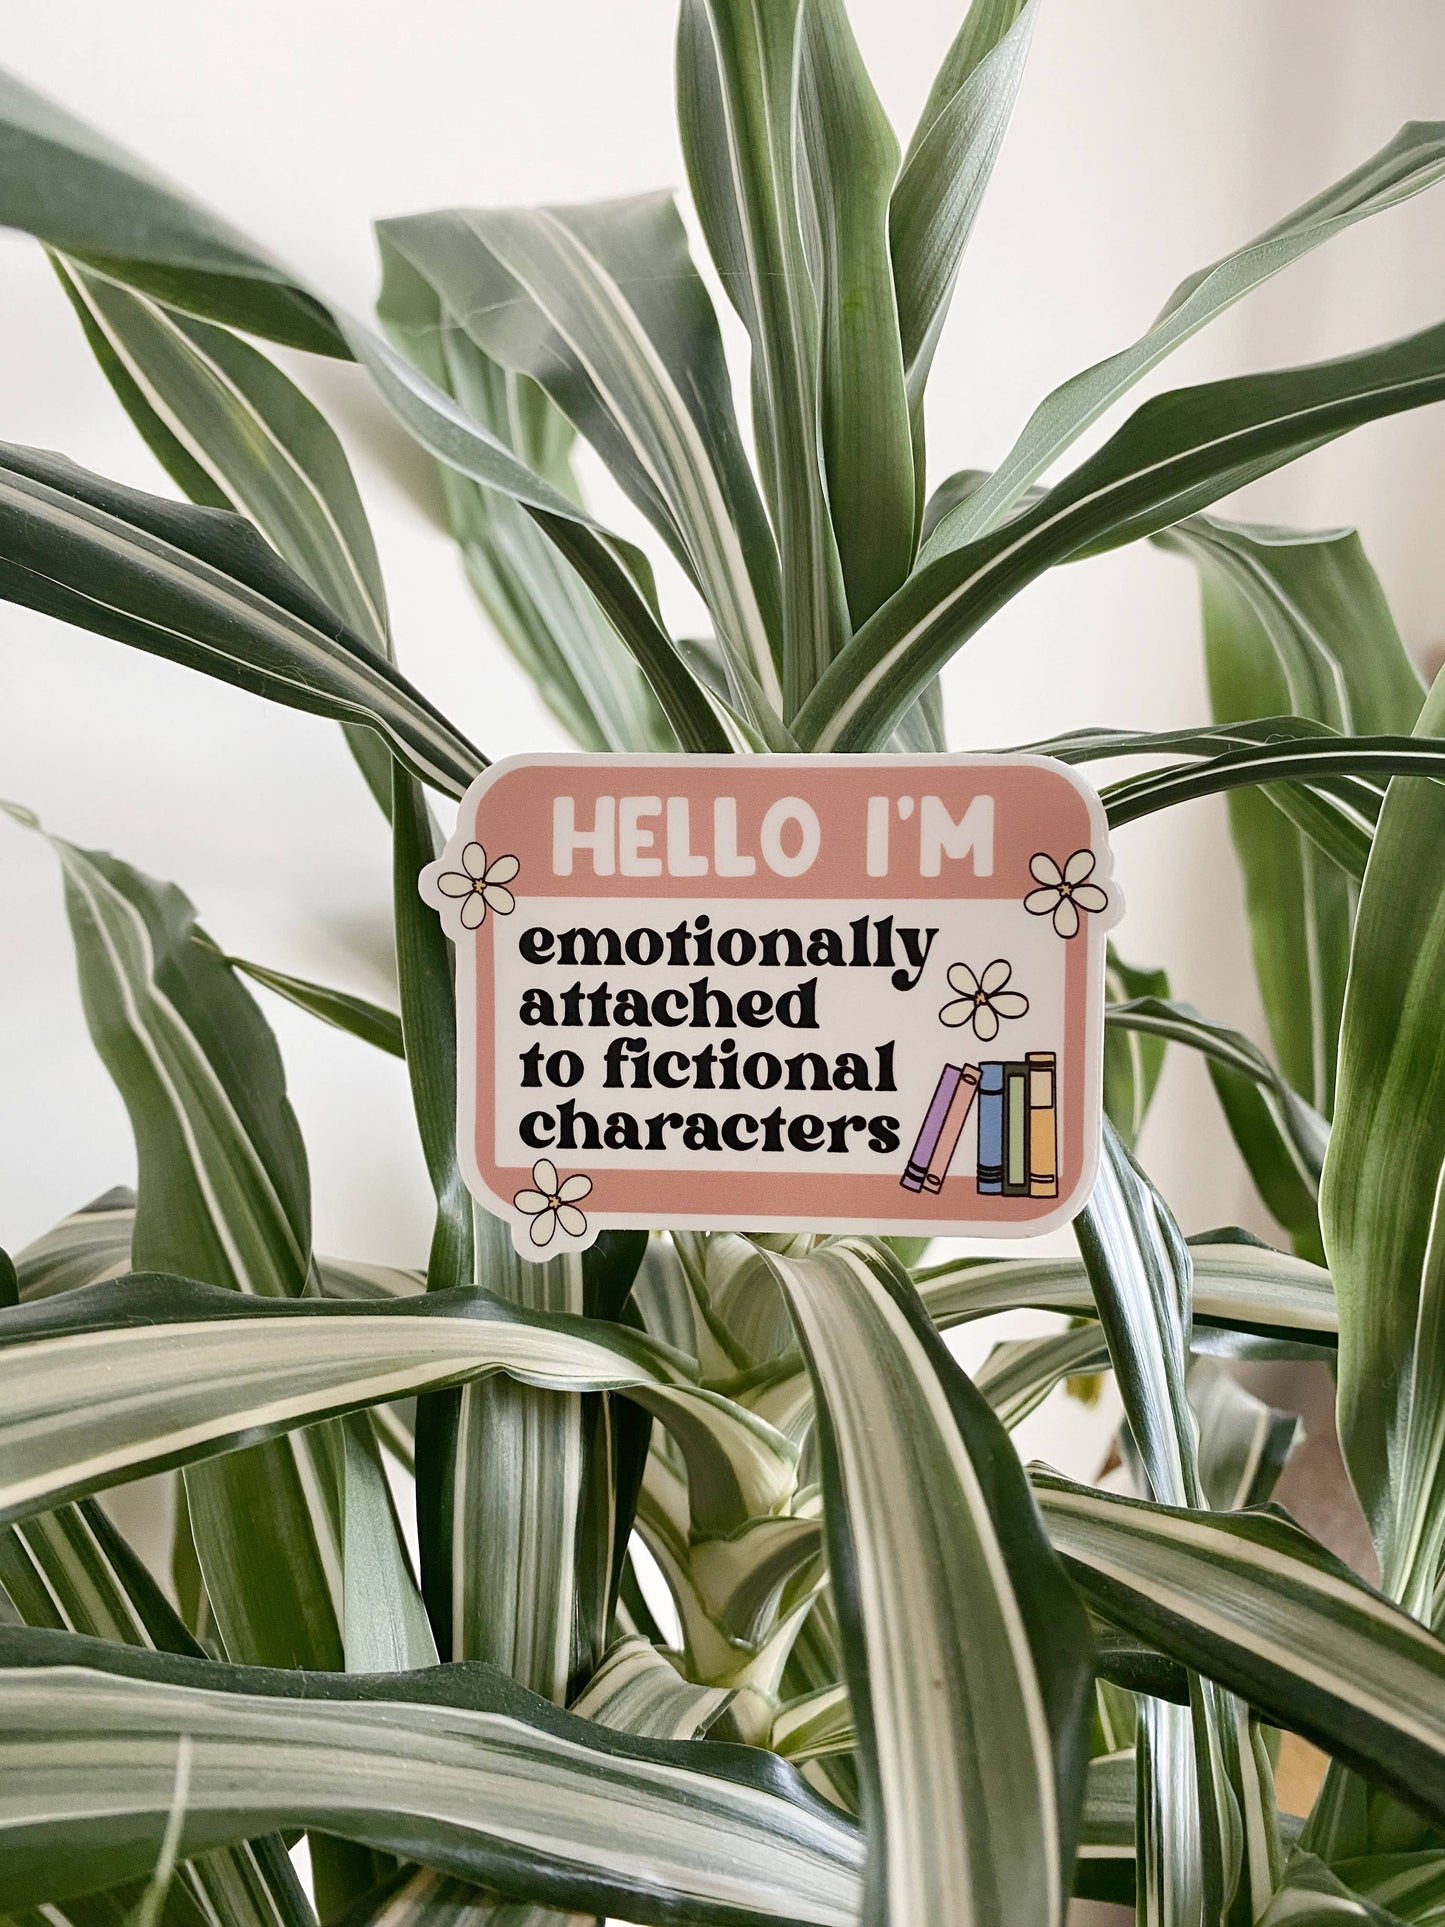 Emotionally Attached to Fictional Characters Sticker